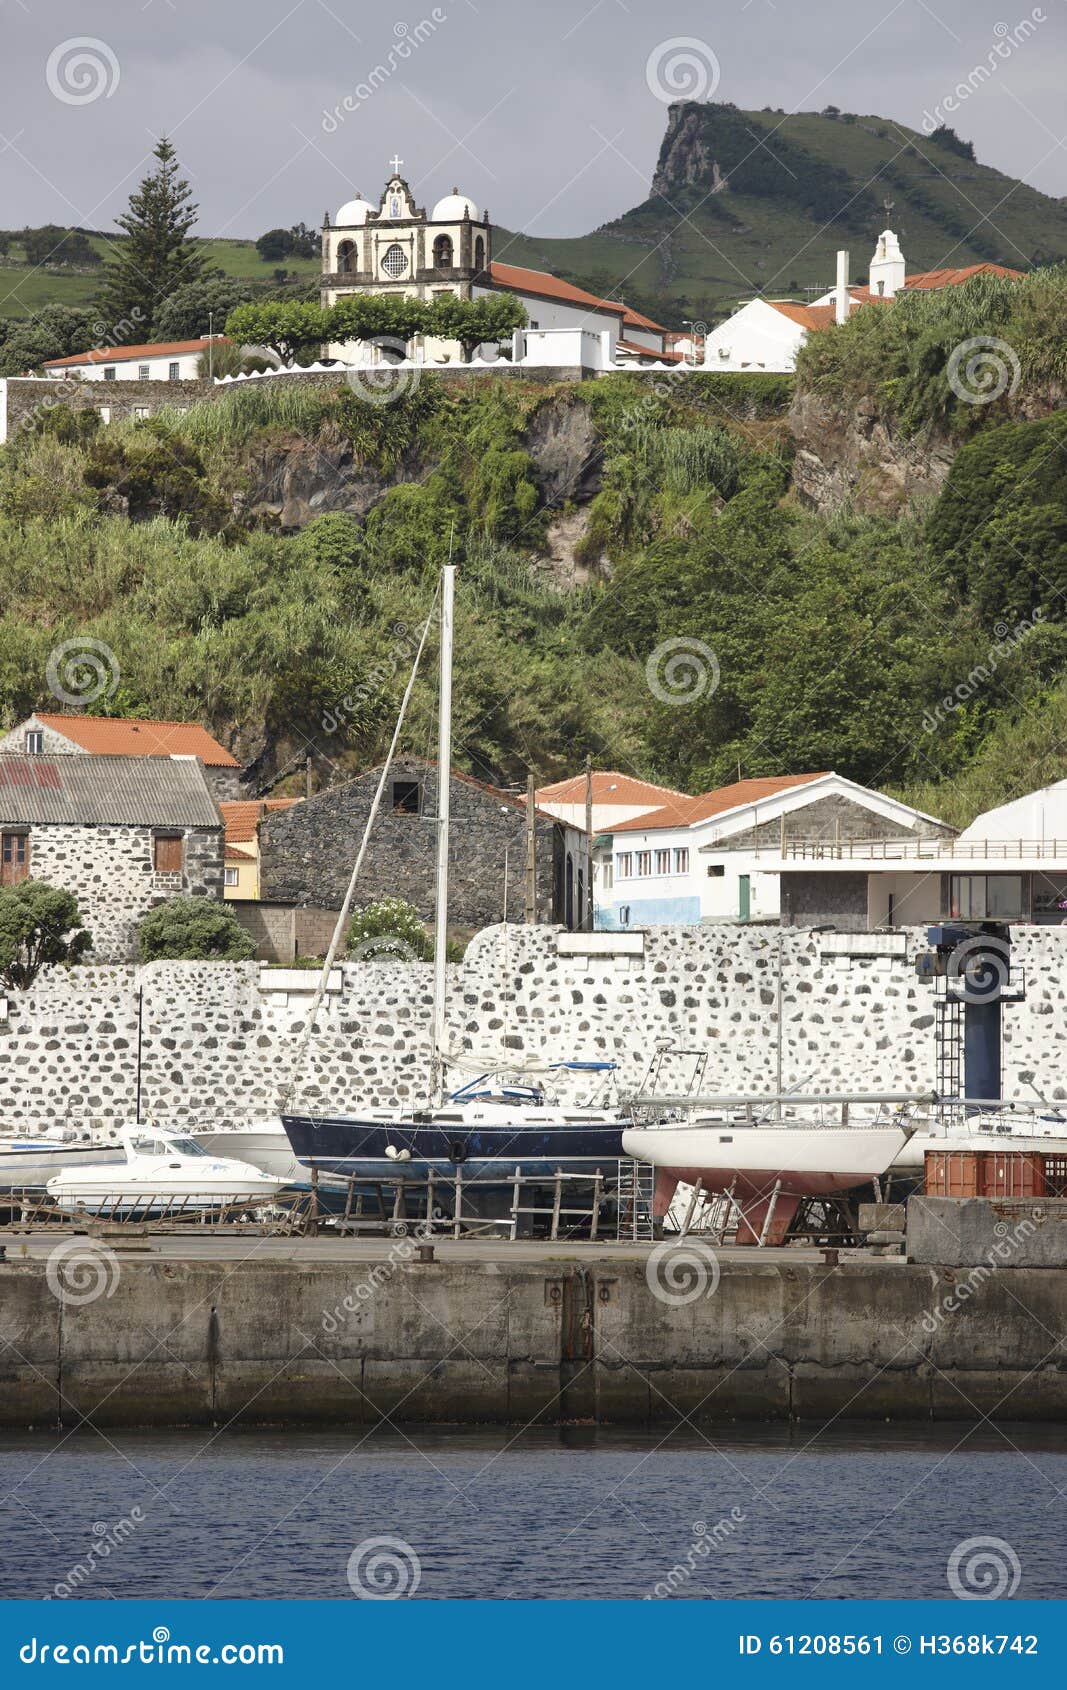 azores landscape in lajes das flores with sailboats and church